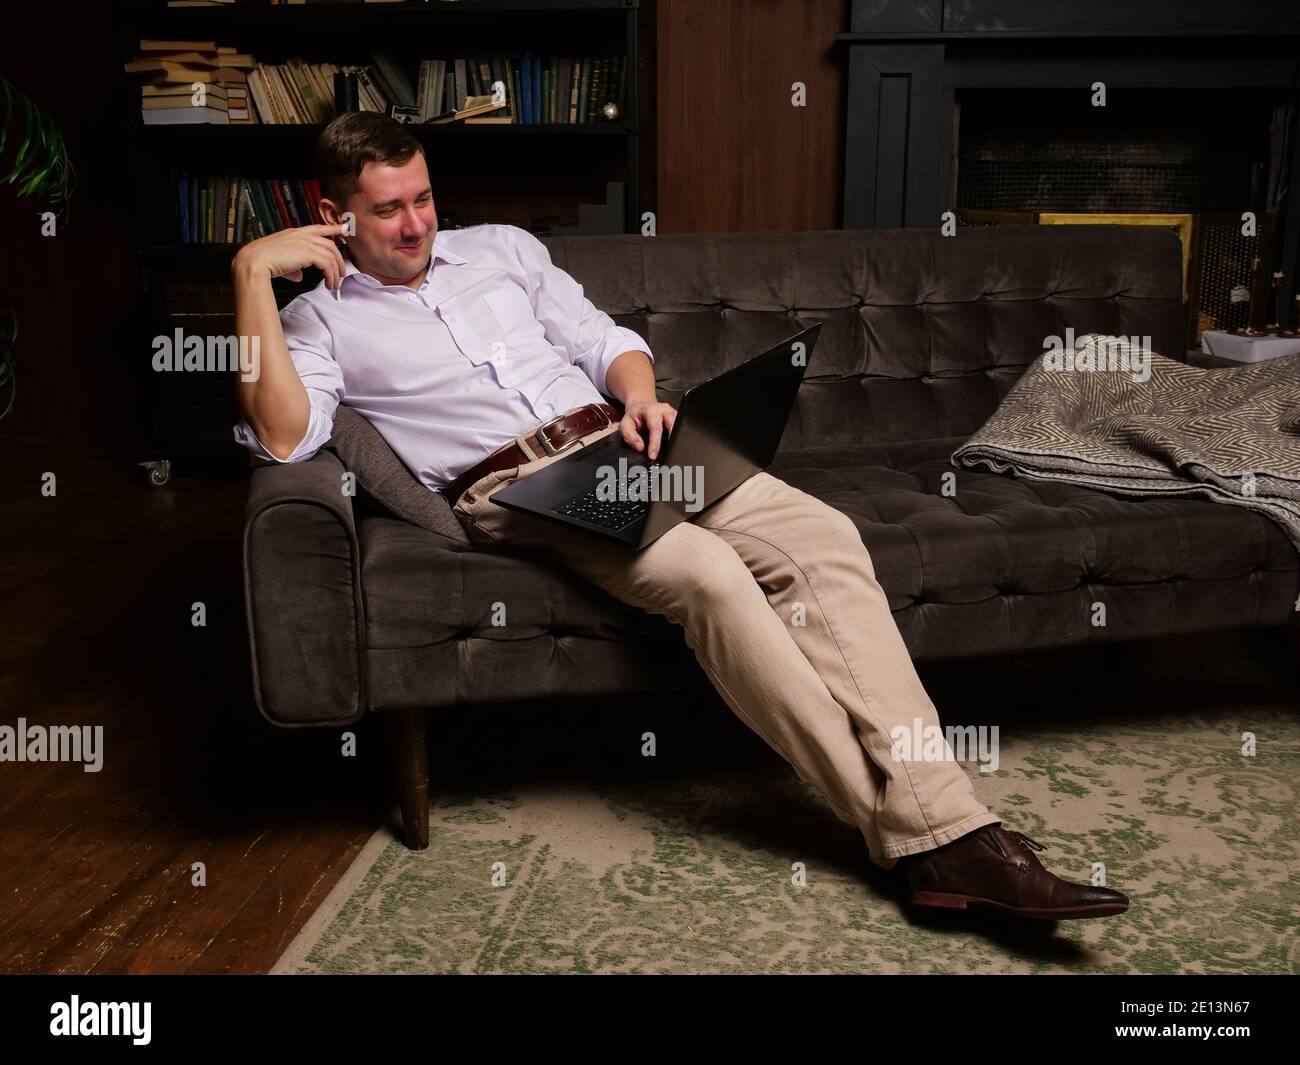 Smiling man watching video on laptop or chatting online while sitting on the couch at home. Stock Photo